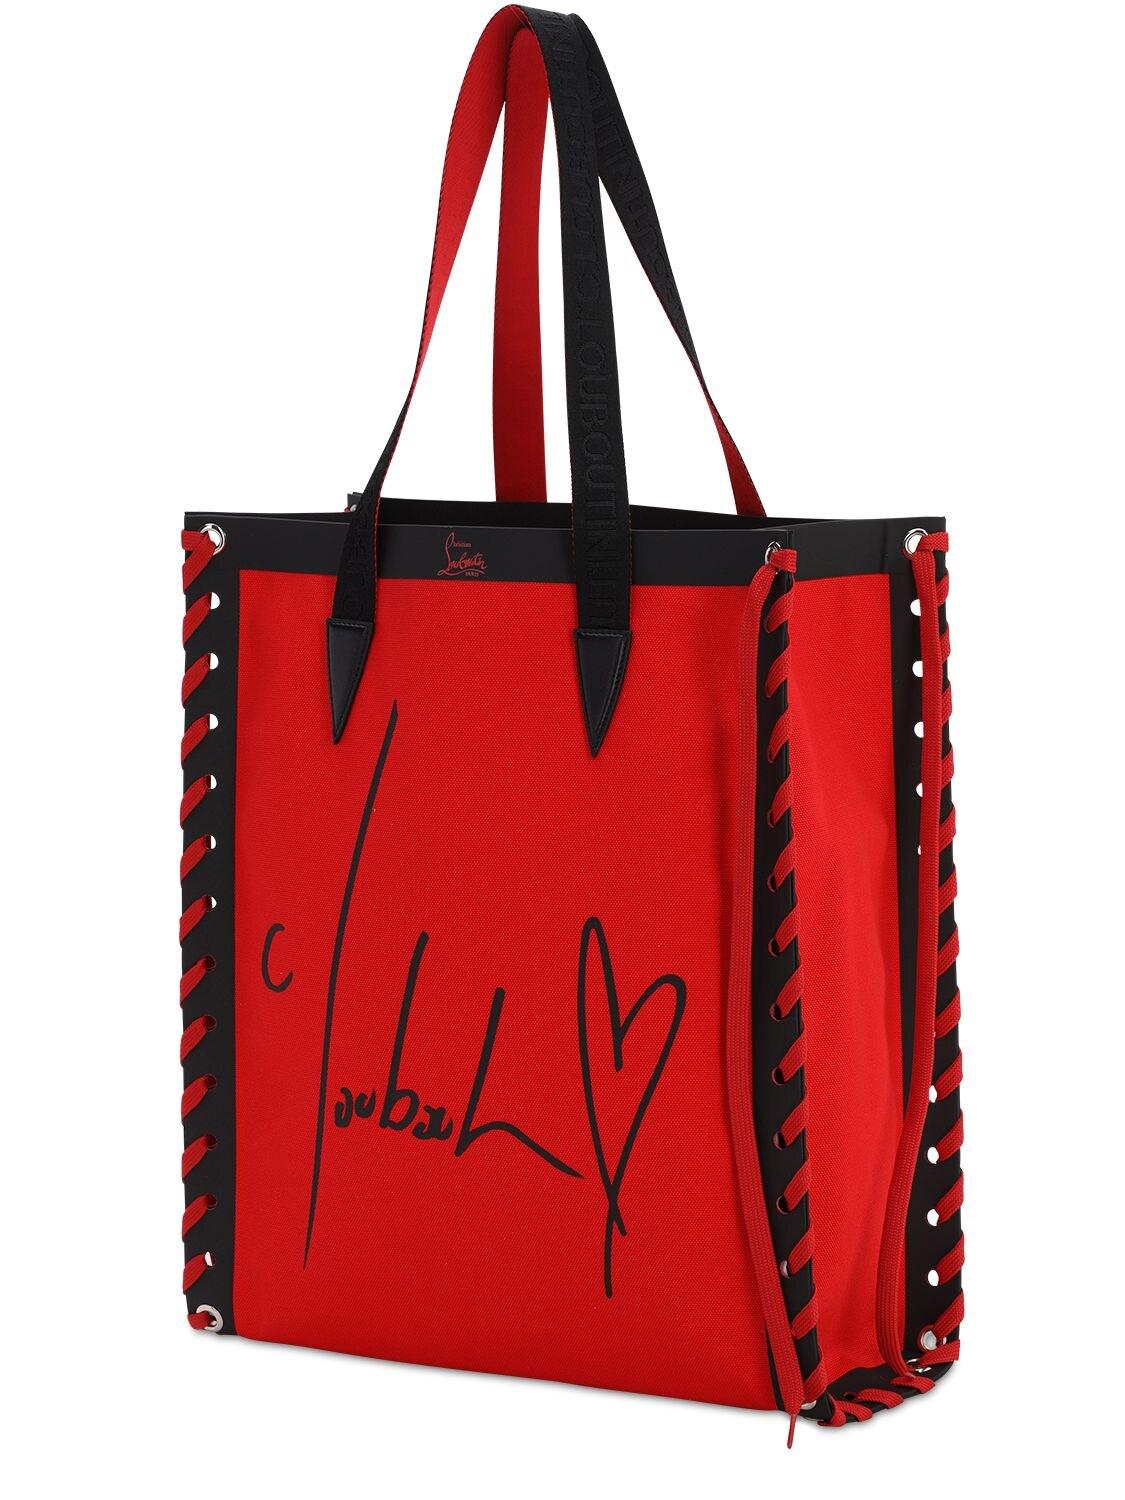 Christian Louboutin Cabalace Small Tote Bag in Red | Lyst